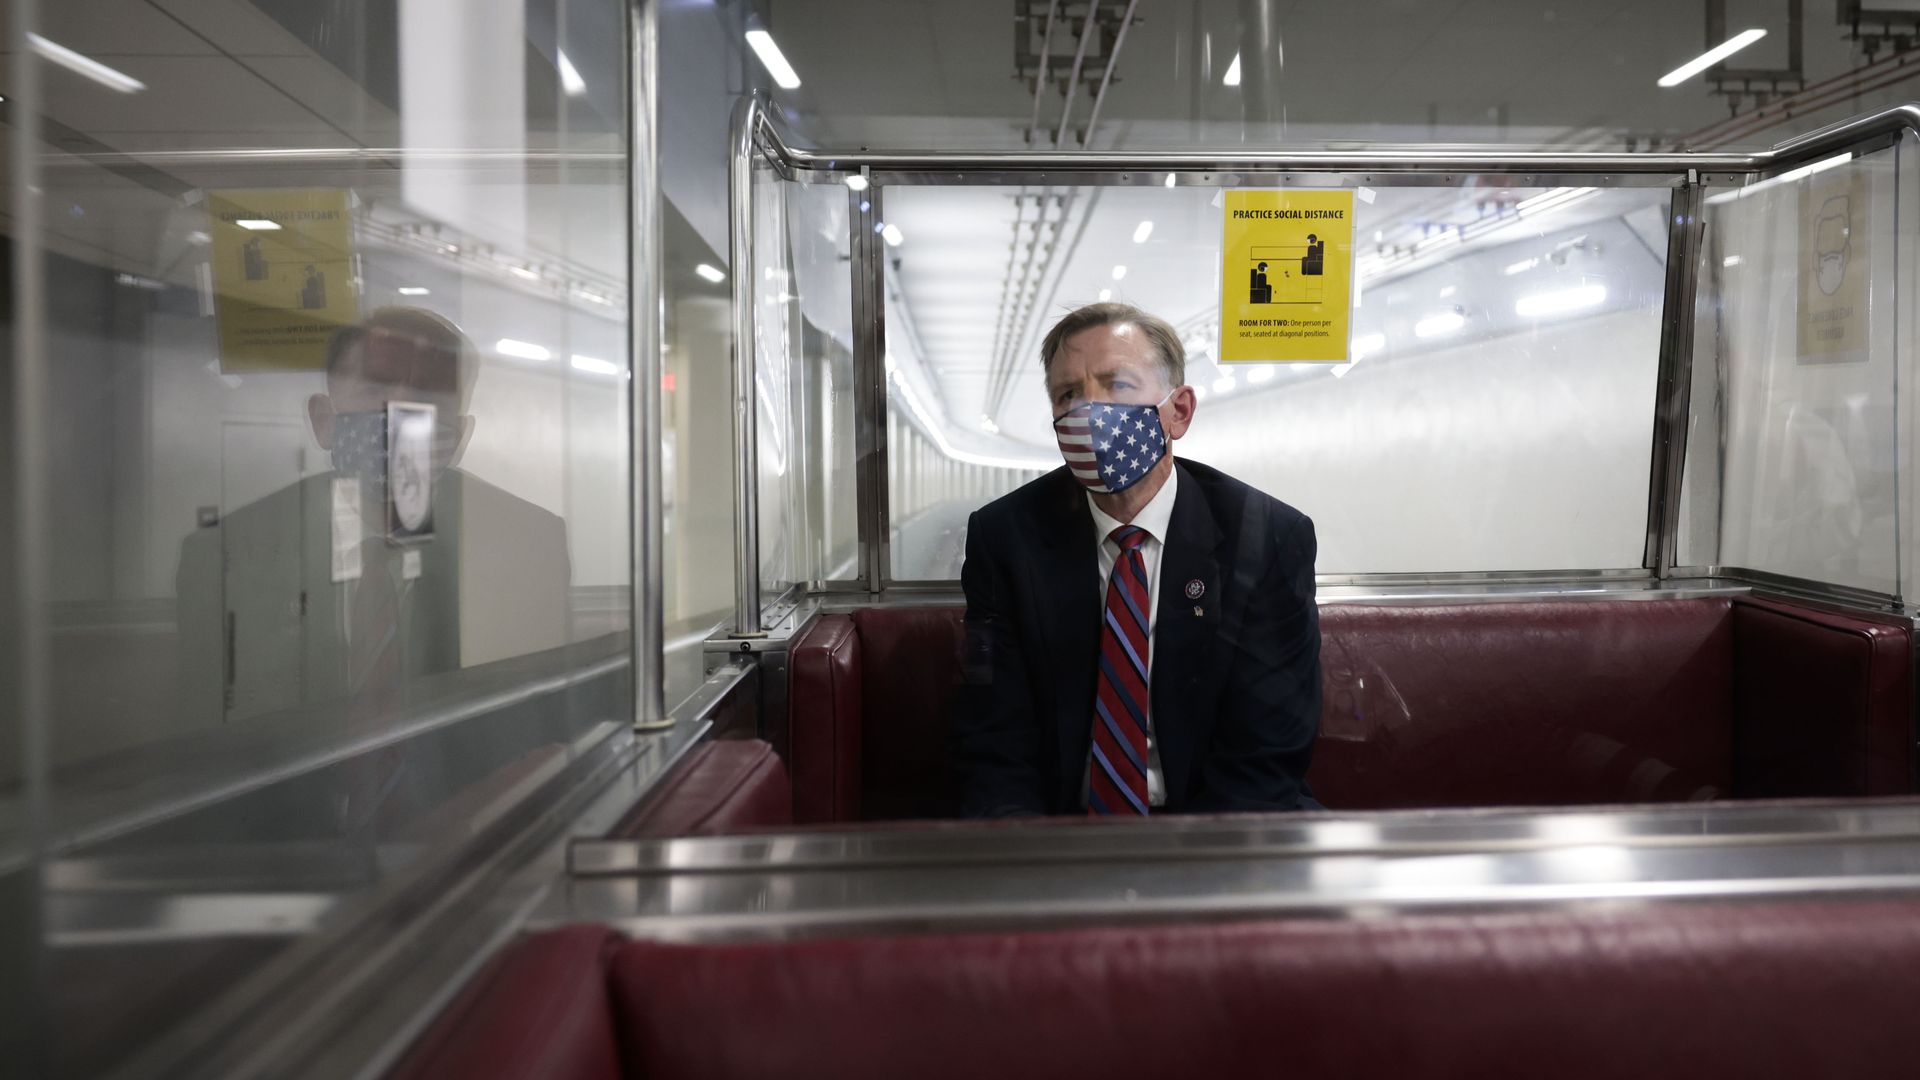 Rep. Paul Gosar is seen sitting in a subway car en route to the U.S. Capitol.